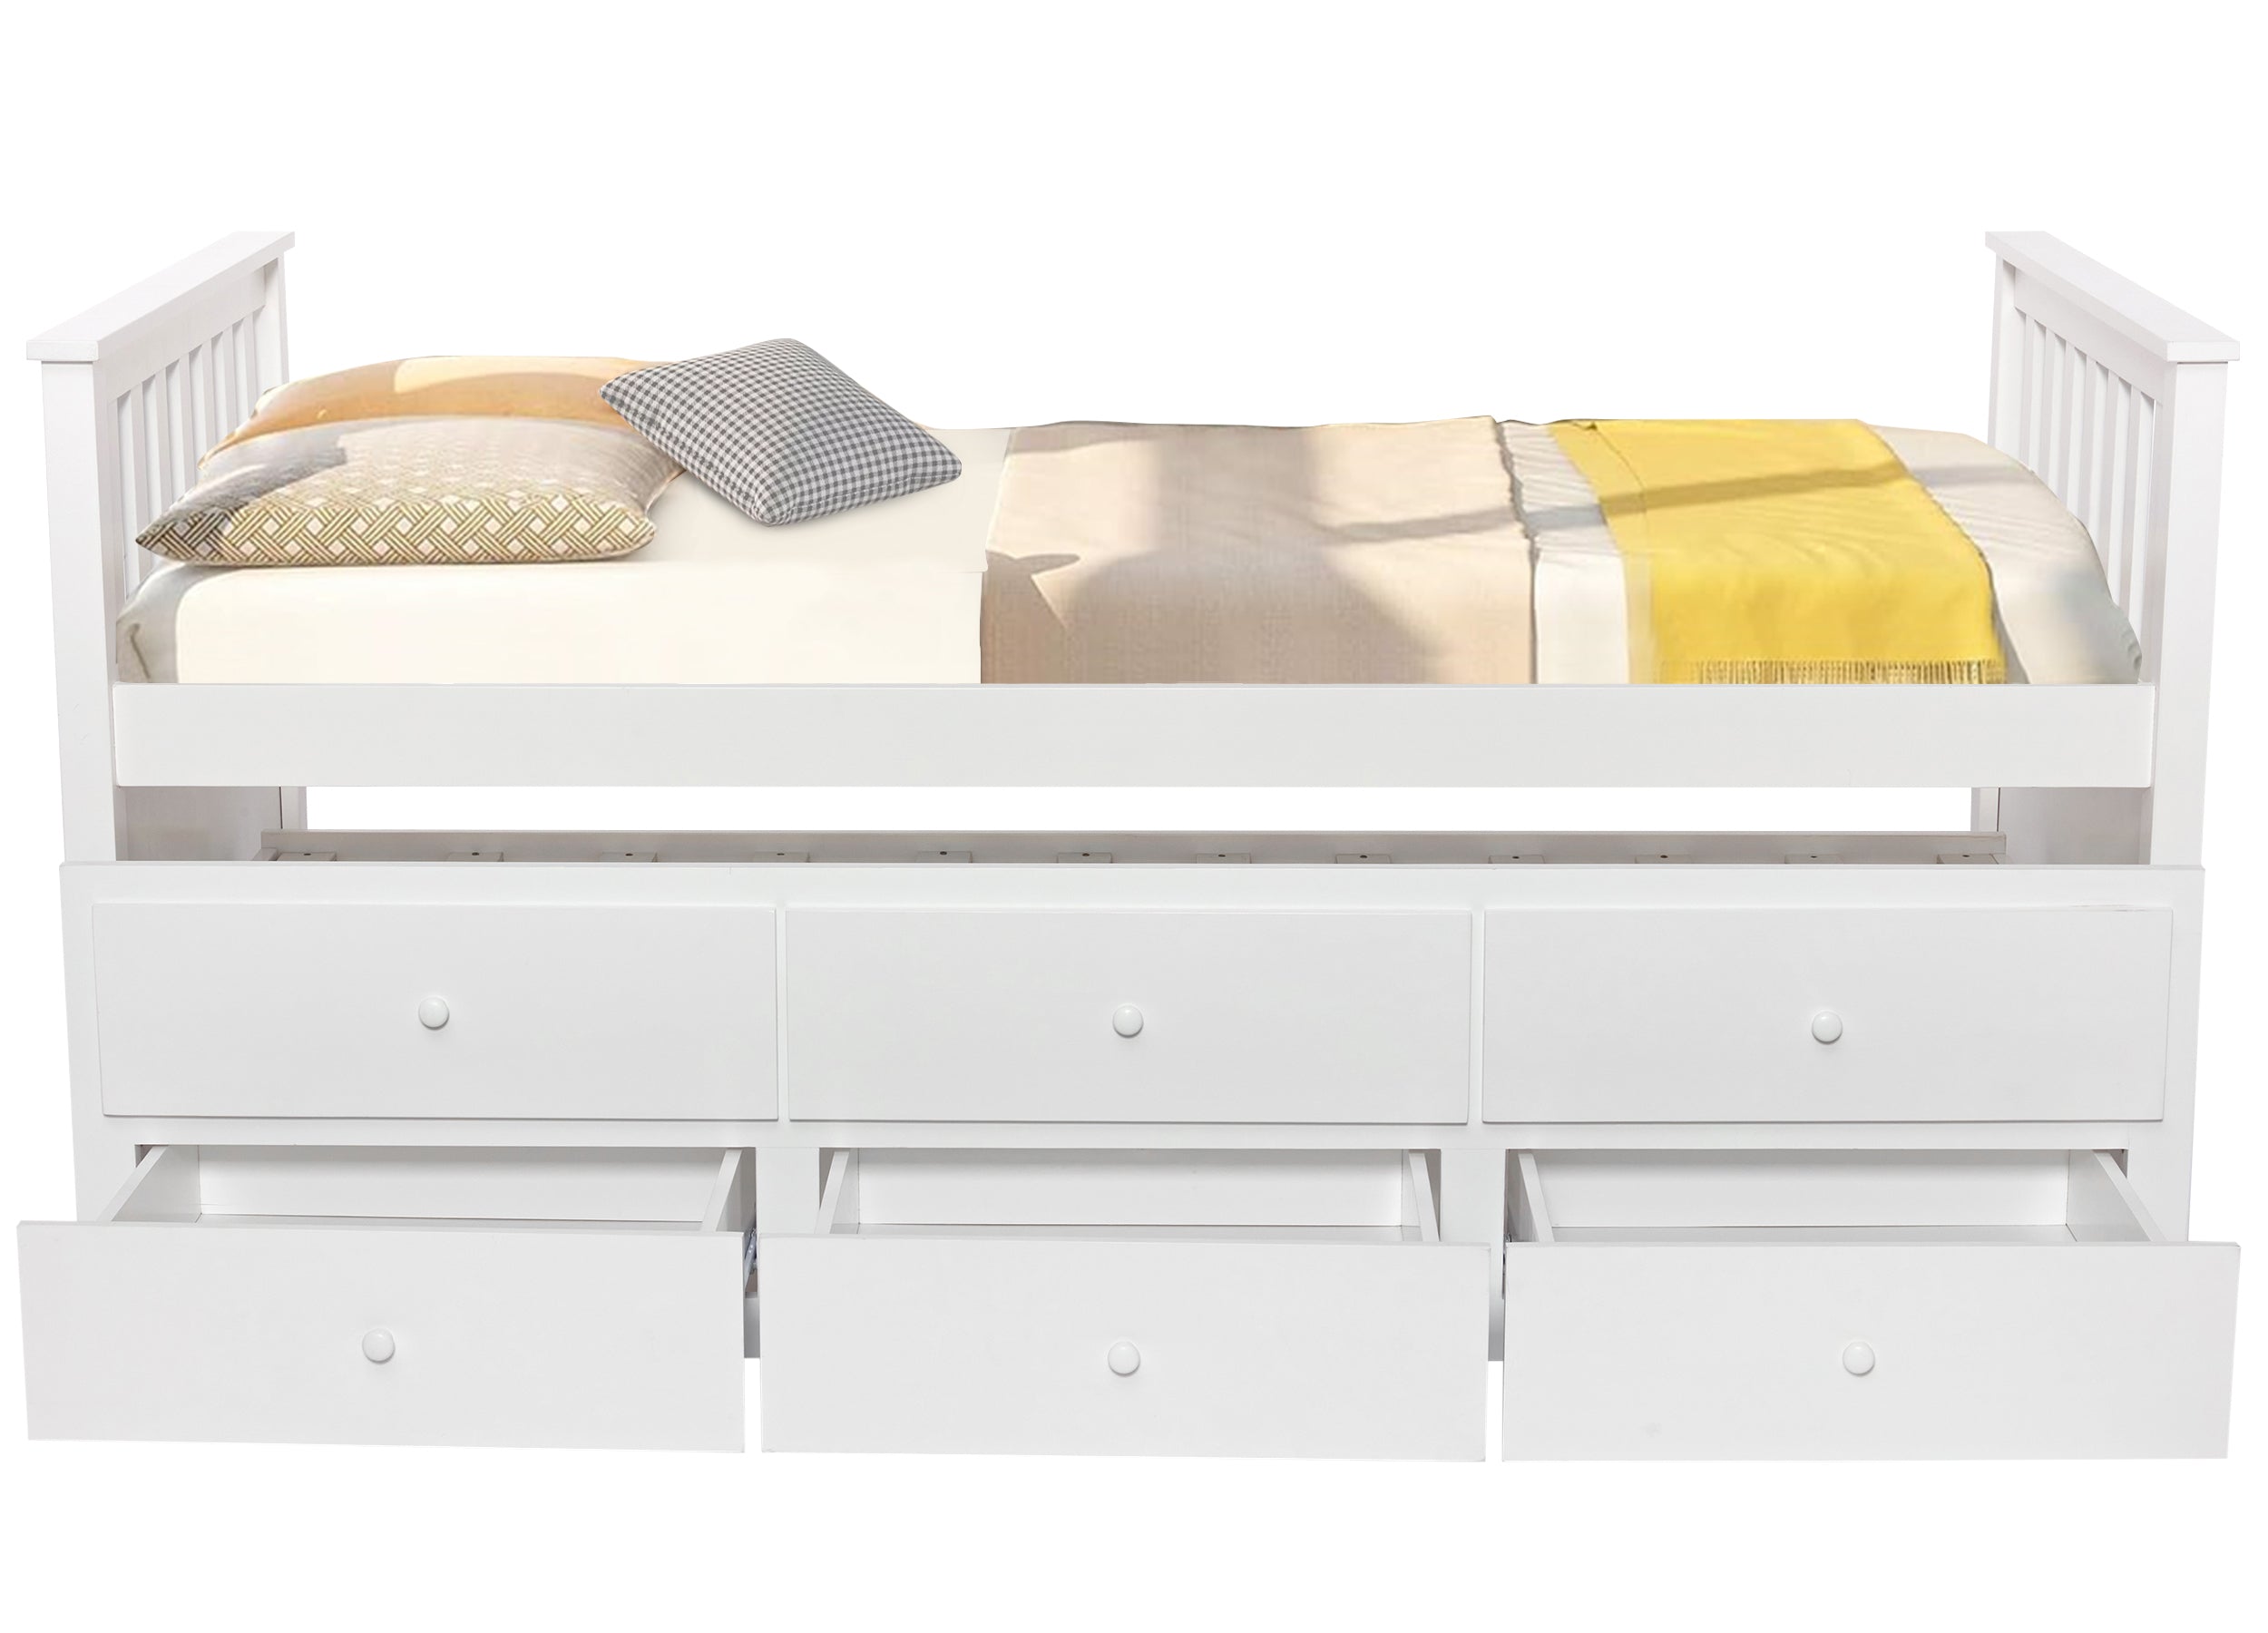 Blisswood Day Bed With Underbed Storage Drawers